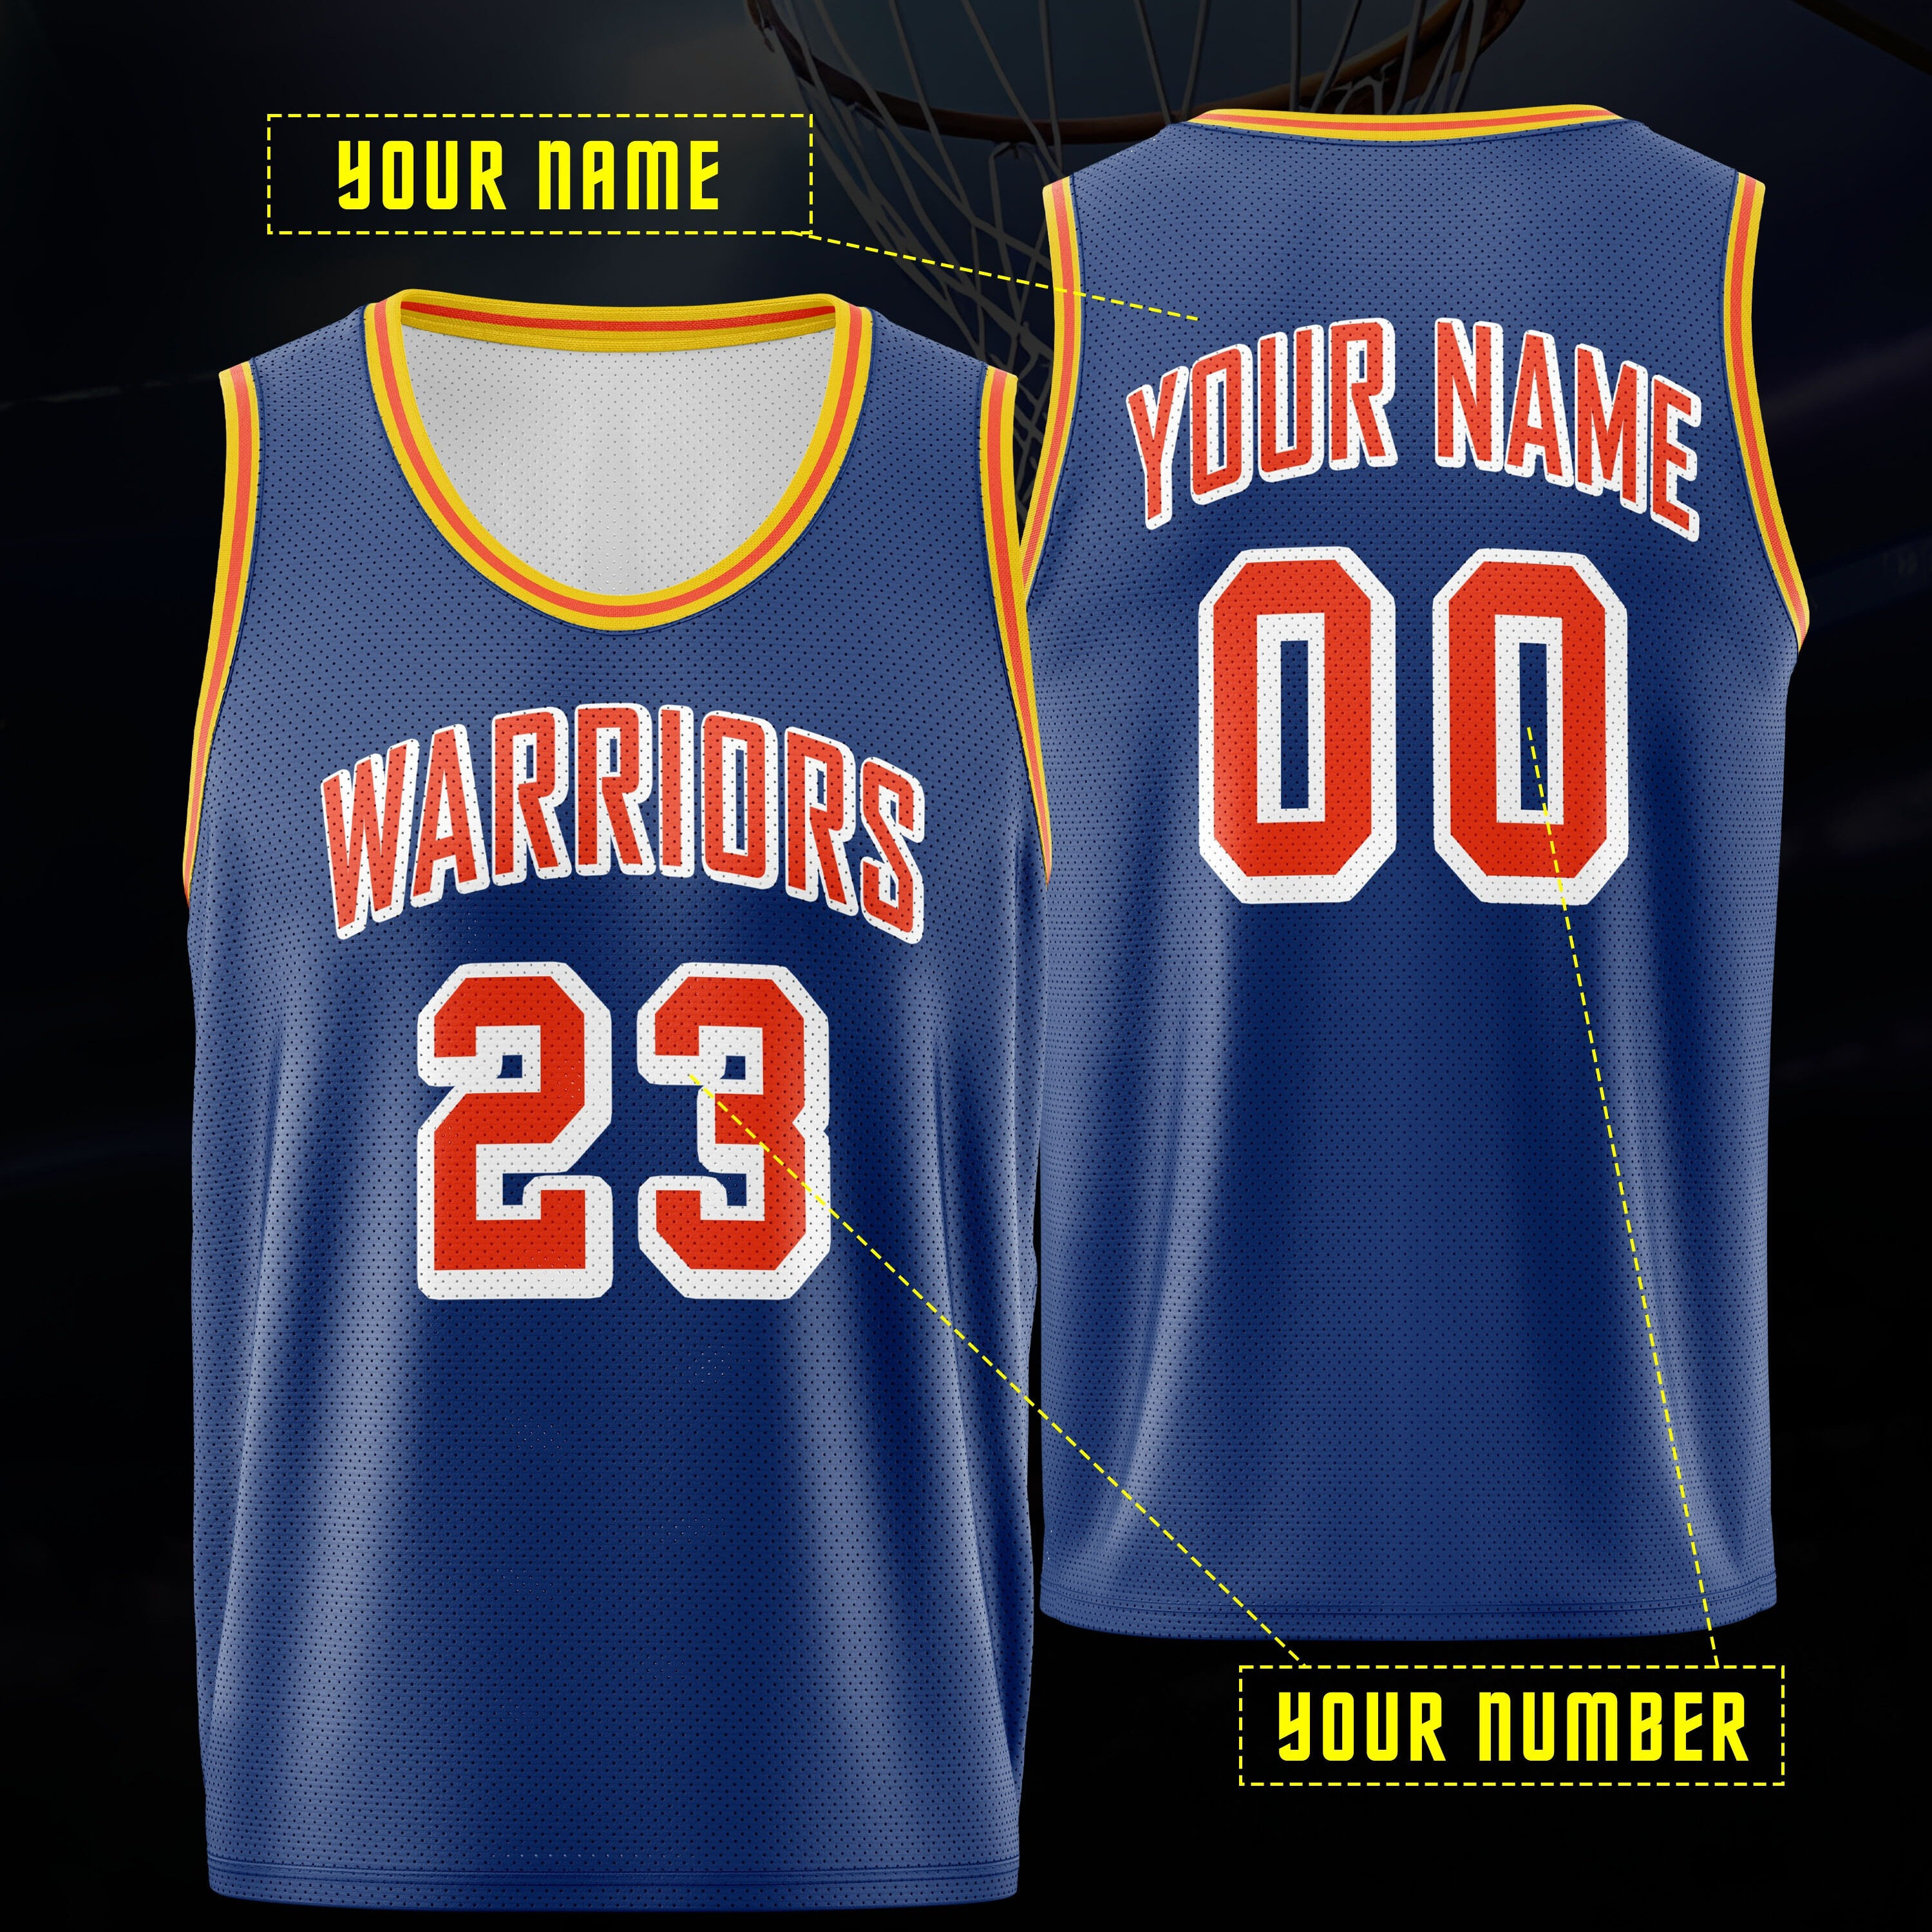 

Customized Letter & Number Embroidery, Men's Basketball Tank Top, Breathable Sports Uniform For Training And Competition